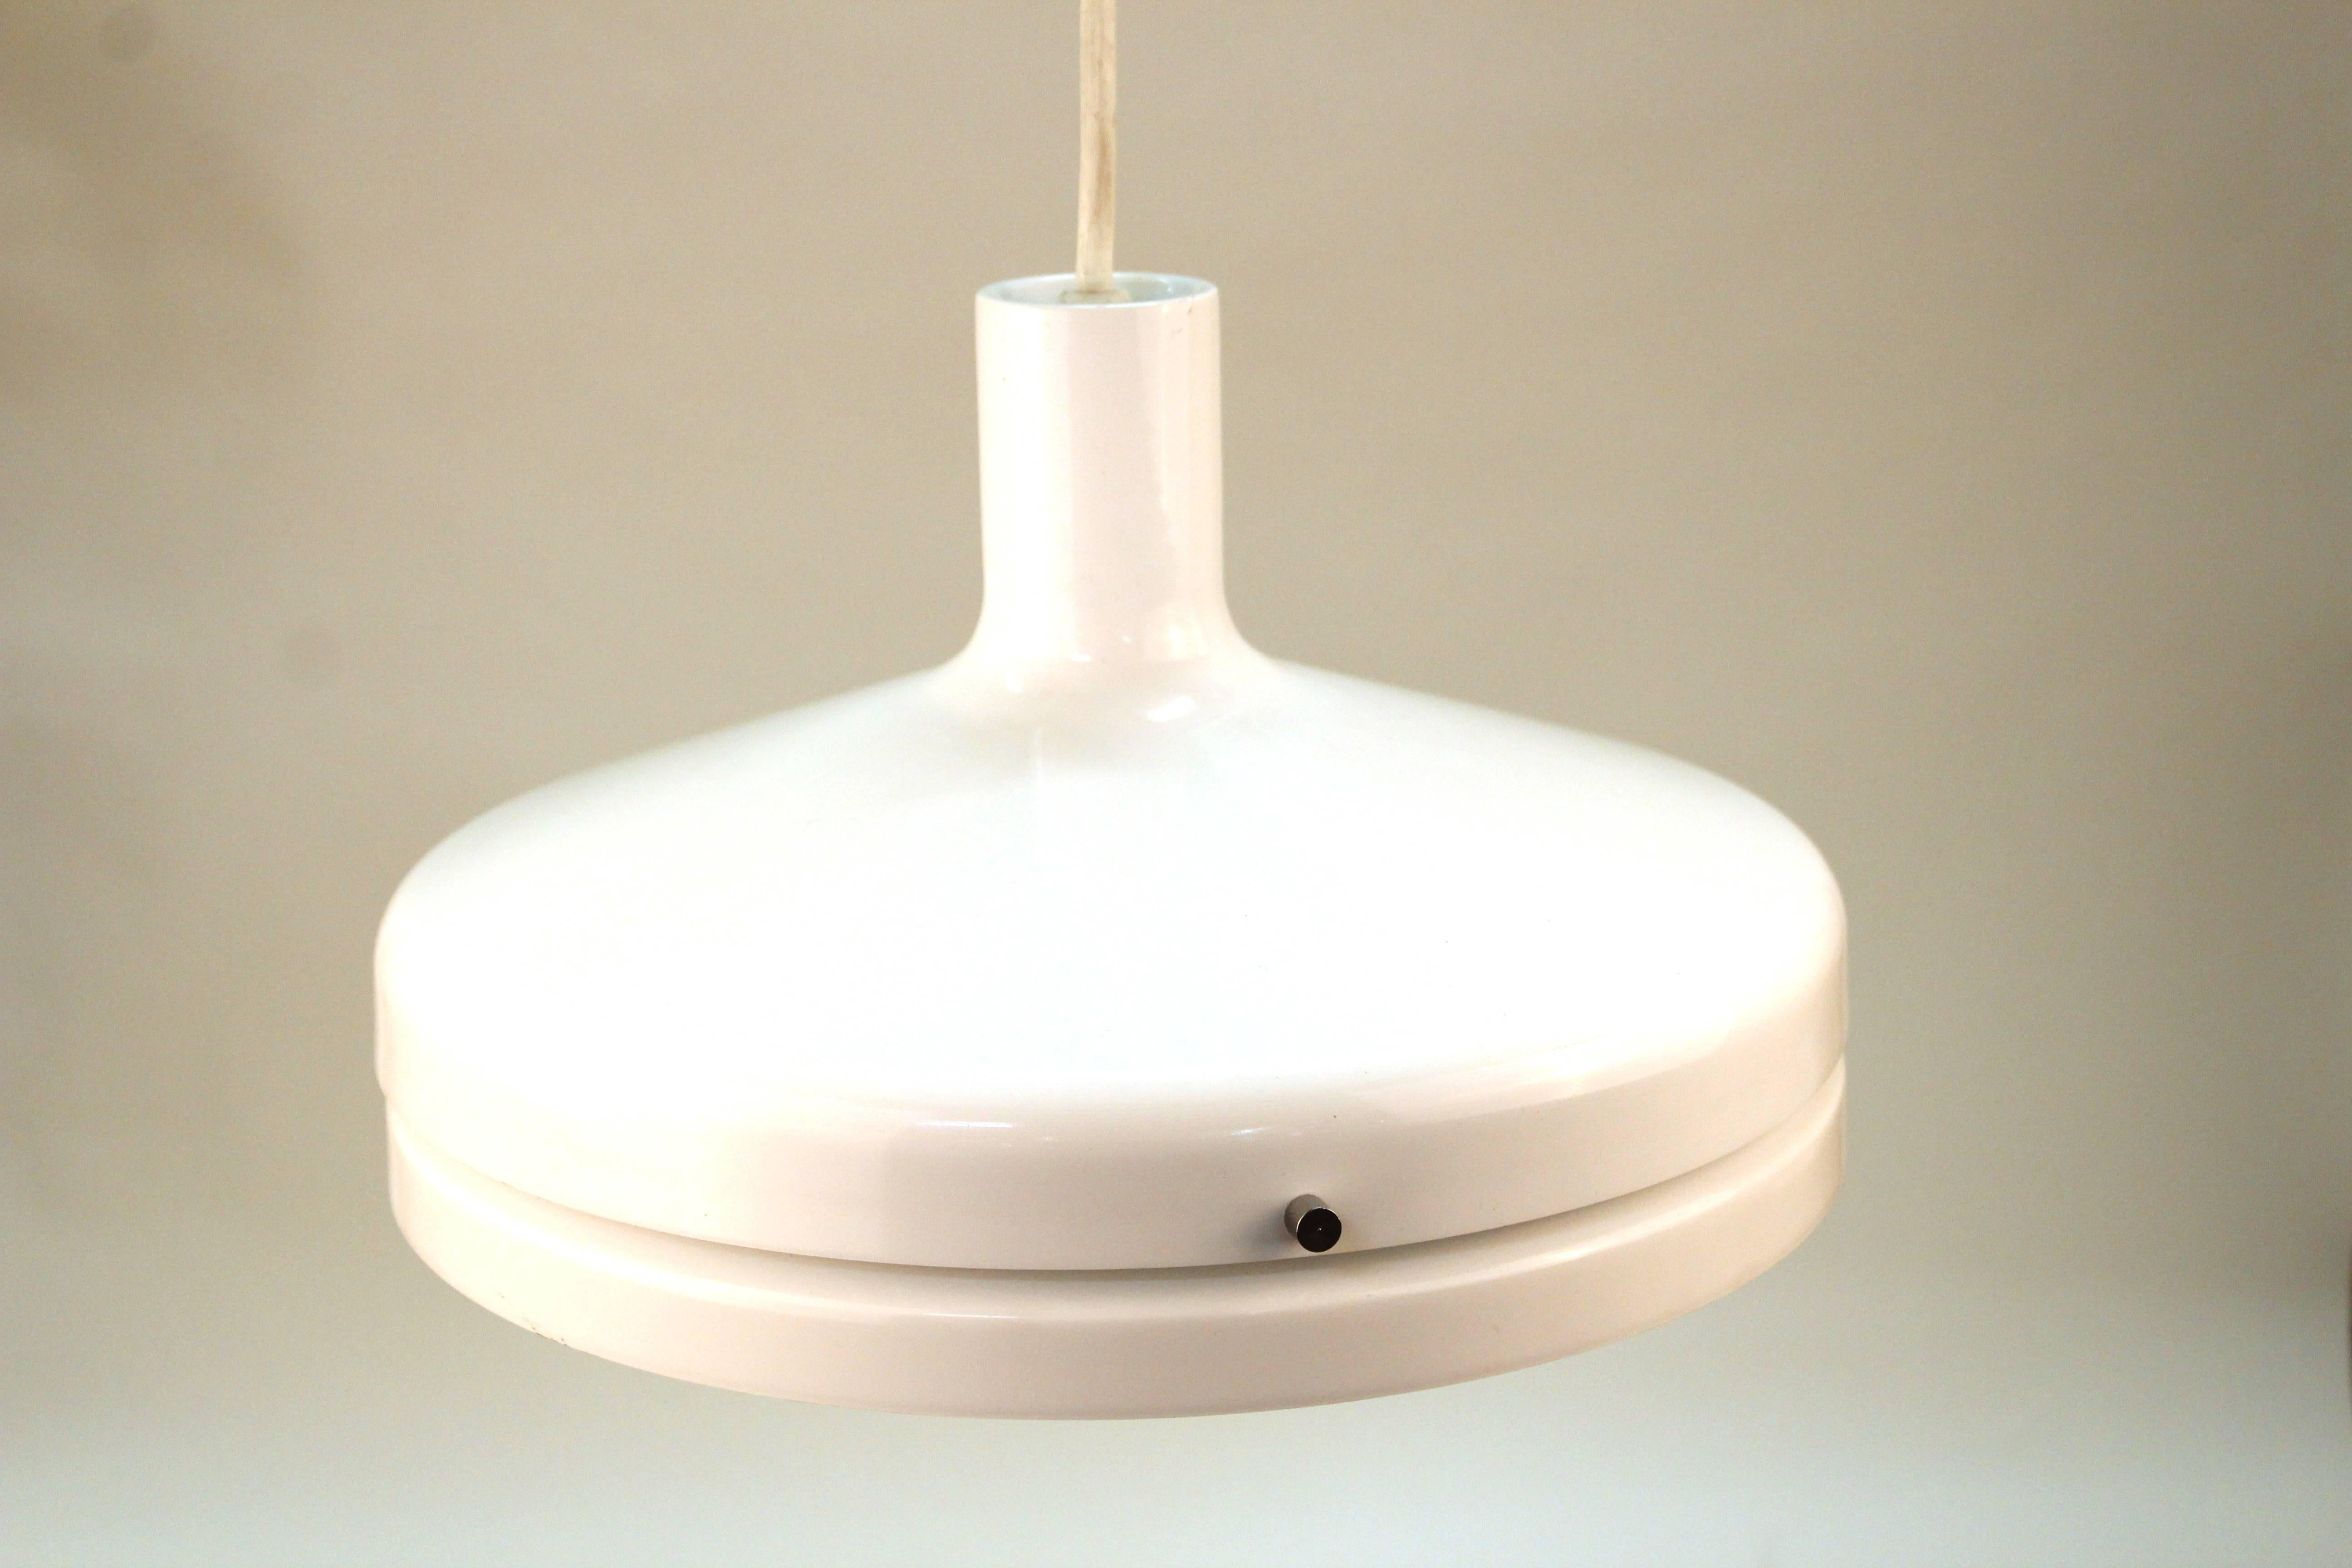 A white pendant light fixture by Lightolier. Manufactured in a saucer shape. The fixture includes the original label. Wear consistent with use. The pendant is in good condition.